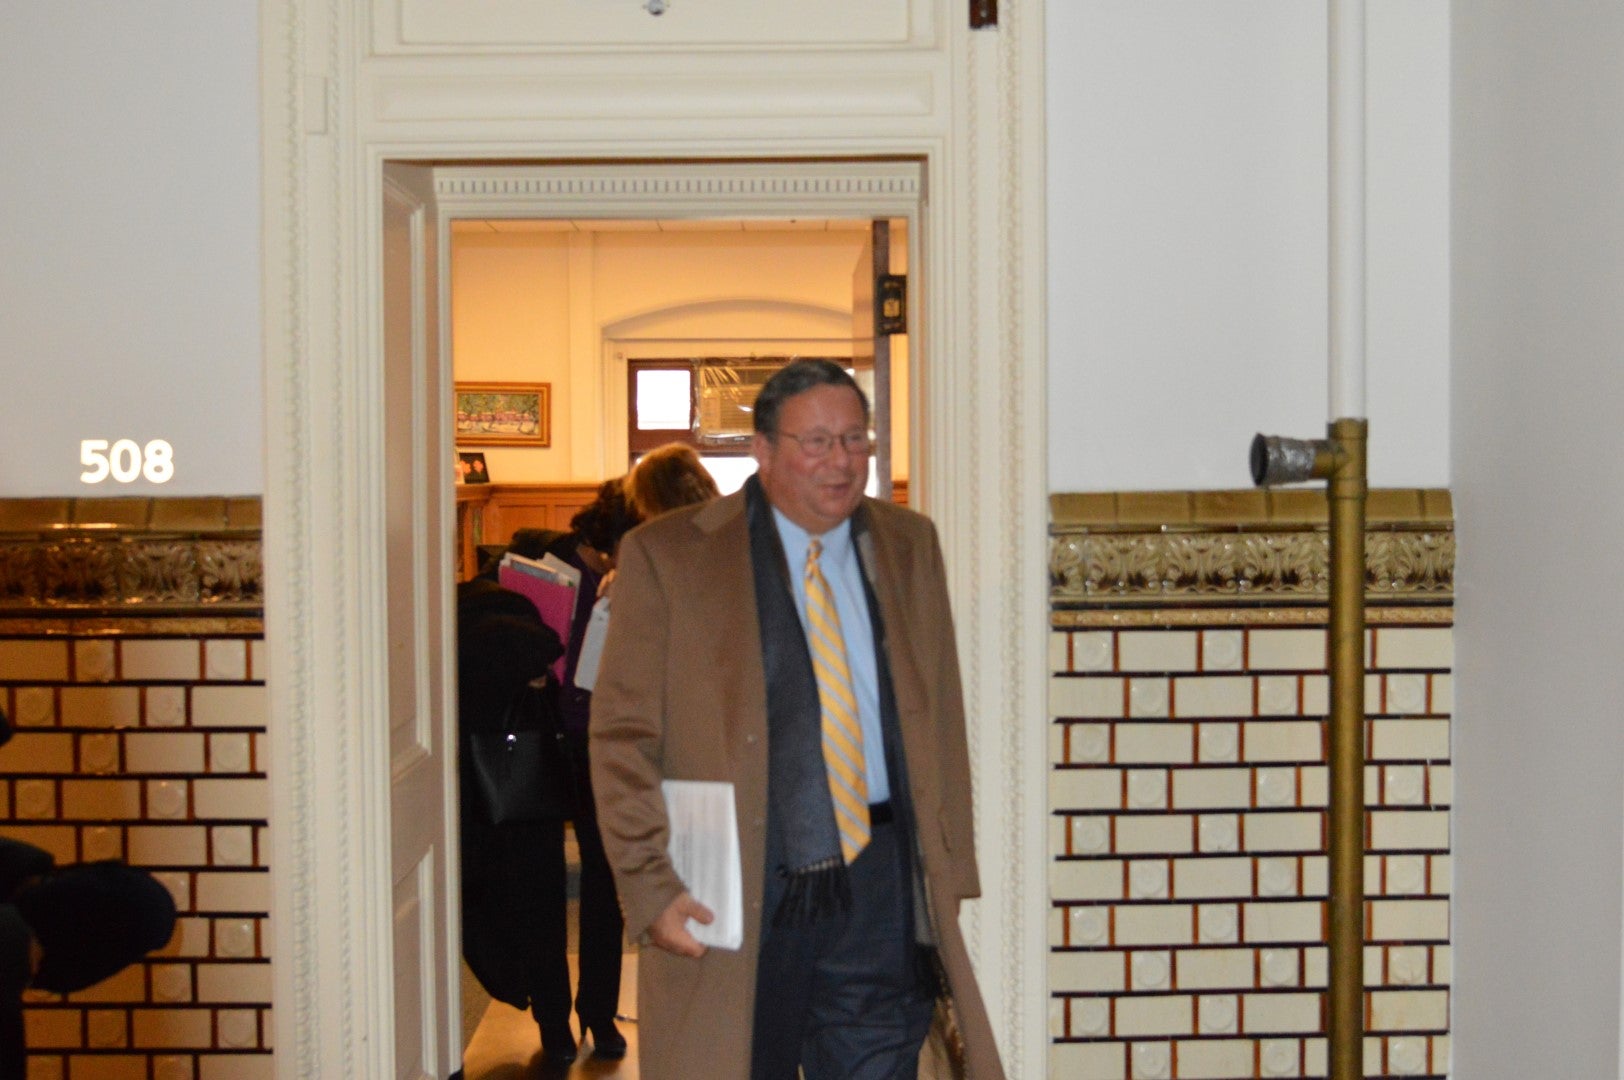  Comcast's David Cohen emerges from Councilman Bill Greenlee's office after a meeting (Tom MacDonald, WHYY) 